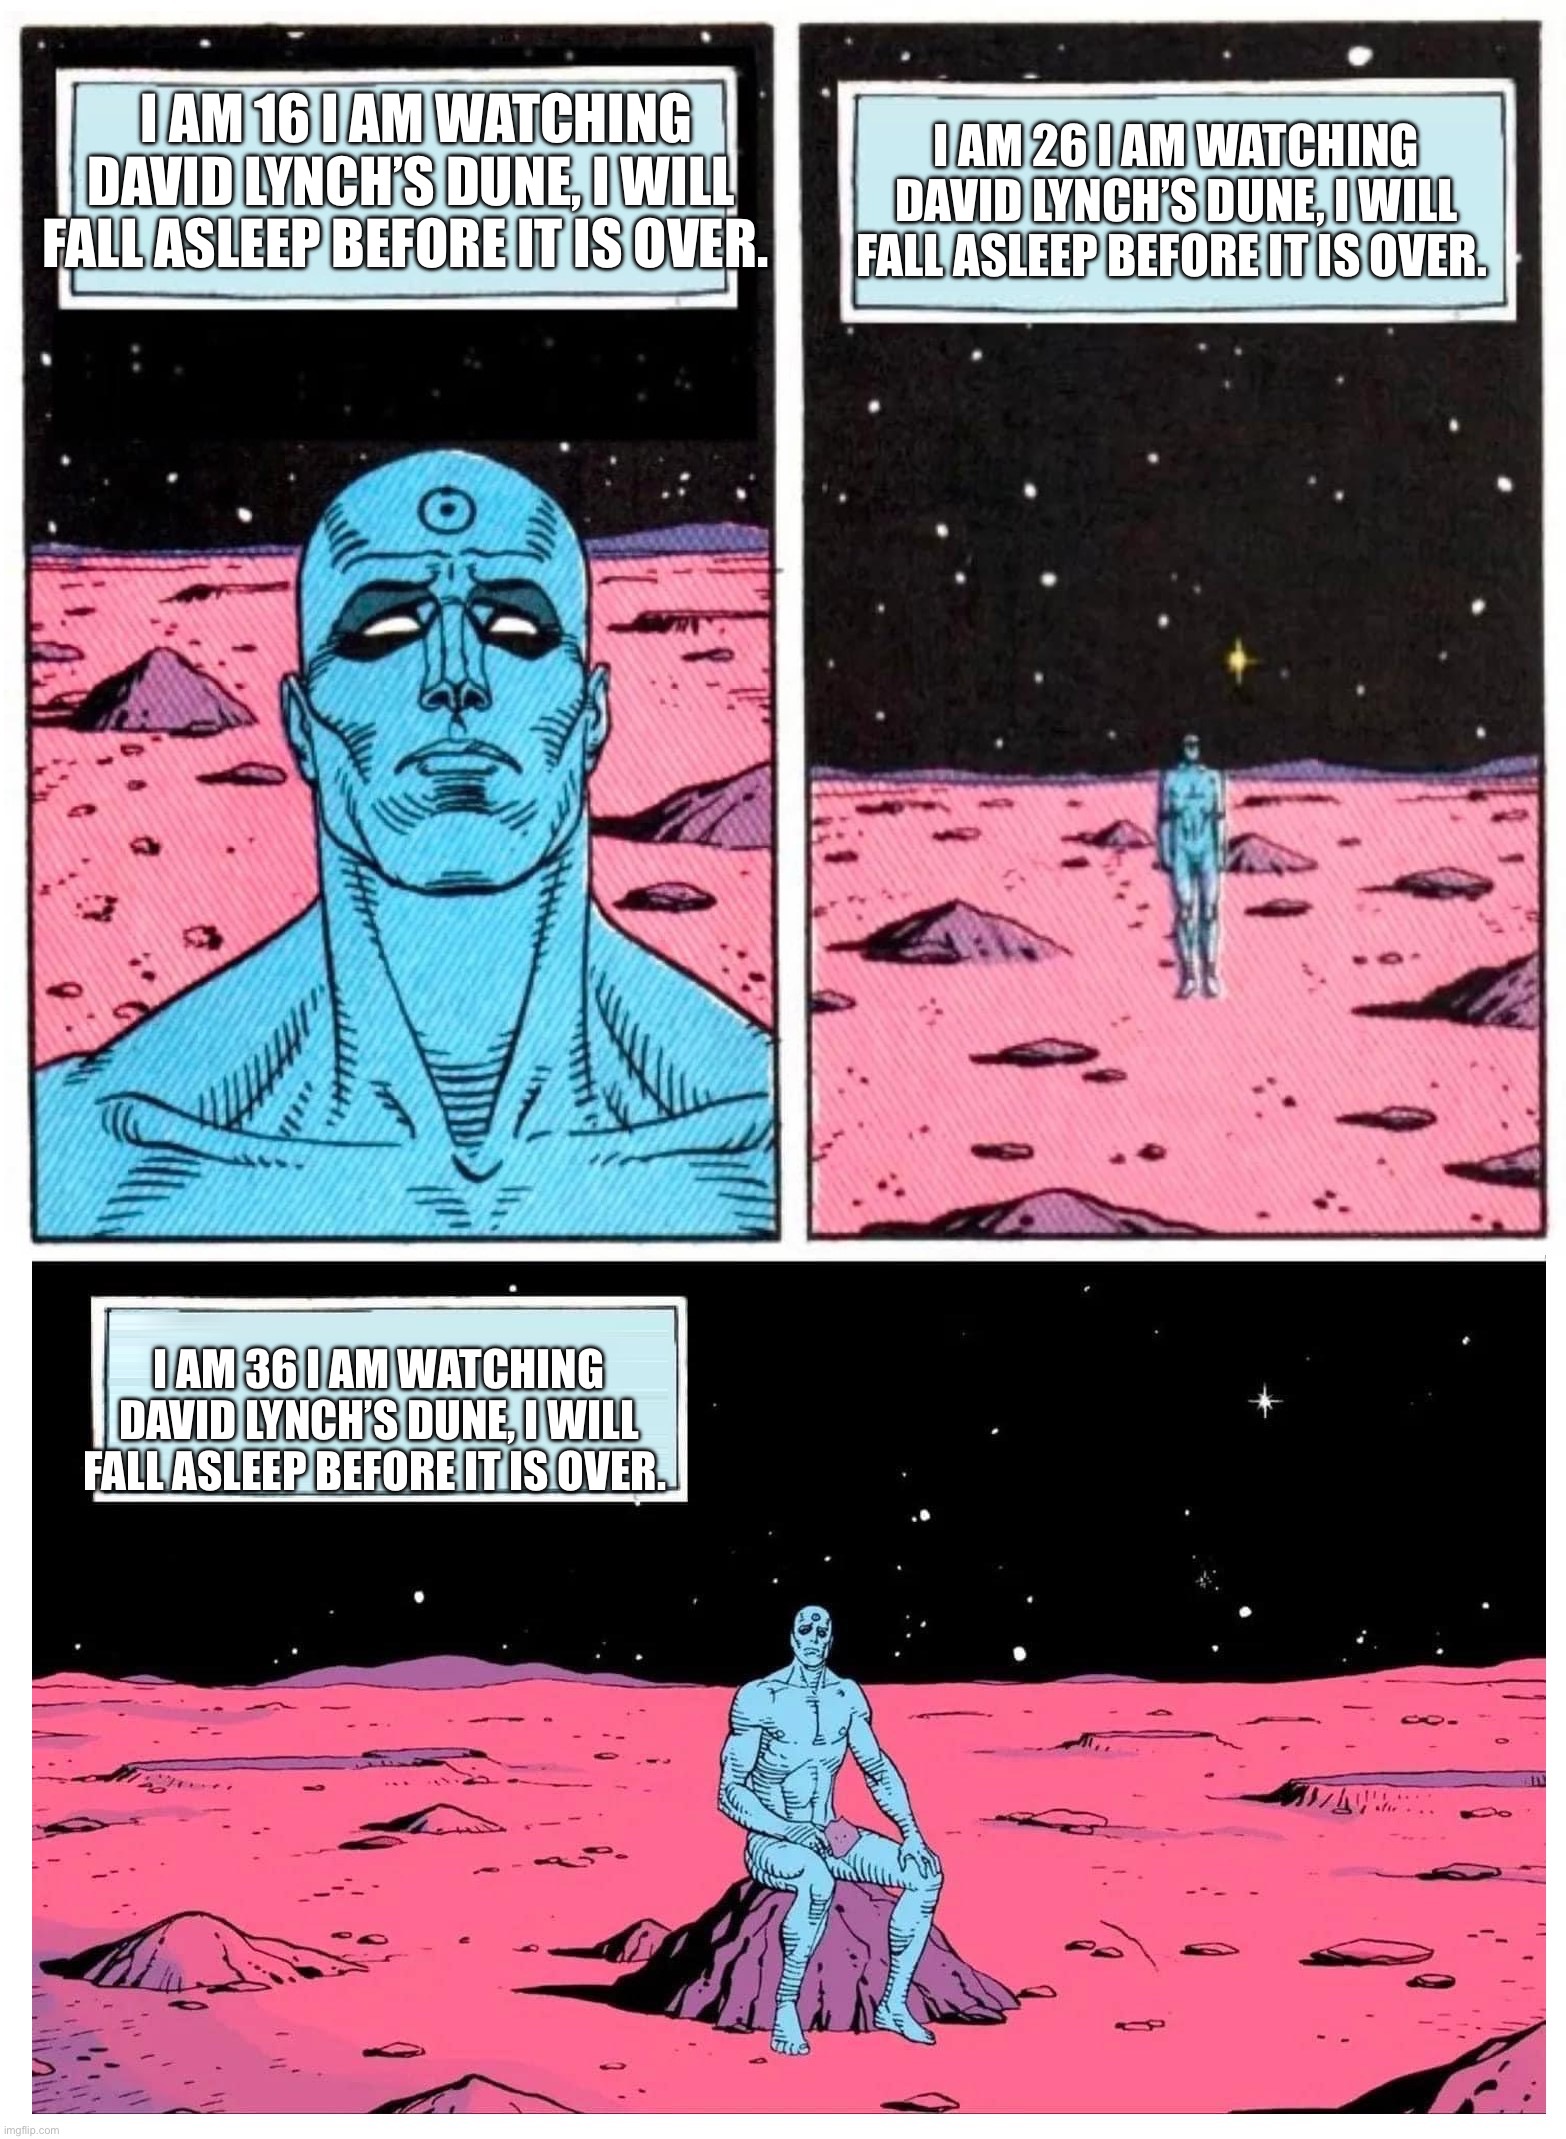 Doctor Manhattan it is 1985 | I AM 26 I AM WATCHING DAVID LYNCH’S DUNE, I WILL FALL ASLEEP BEFORE IT IS OVER. I AM 16 I AM WATCHING DAVID LYNCH’S DUNE, I WILL FALL ASLEEP BEFORE IT IS OVER. I AM 36 I AM WATCHING DAVID LYNCH’S DUNE, I WILL FALL ASLEEP BEFORE IT IS OVER. | image tagged in doctor manhattan it is 1985 | made w/ Imgflip meme maker